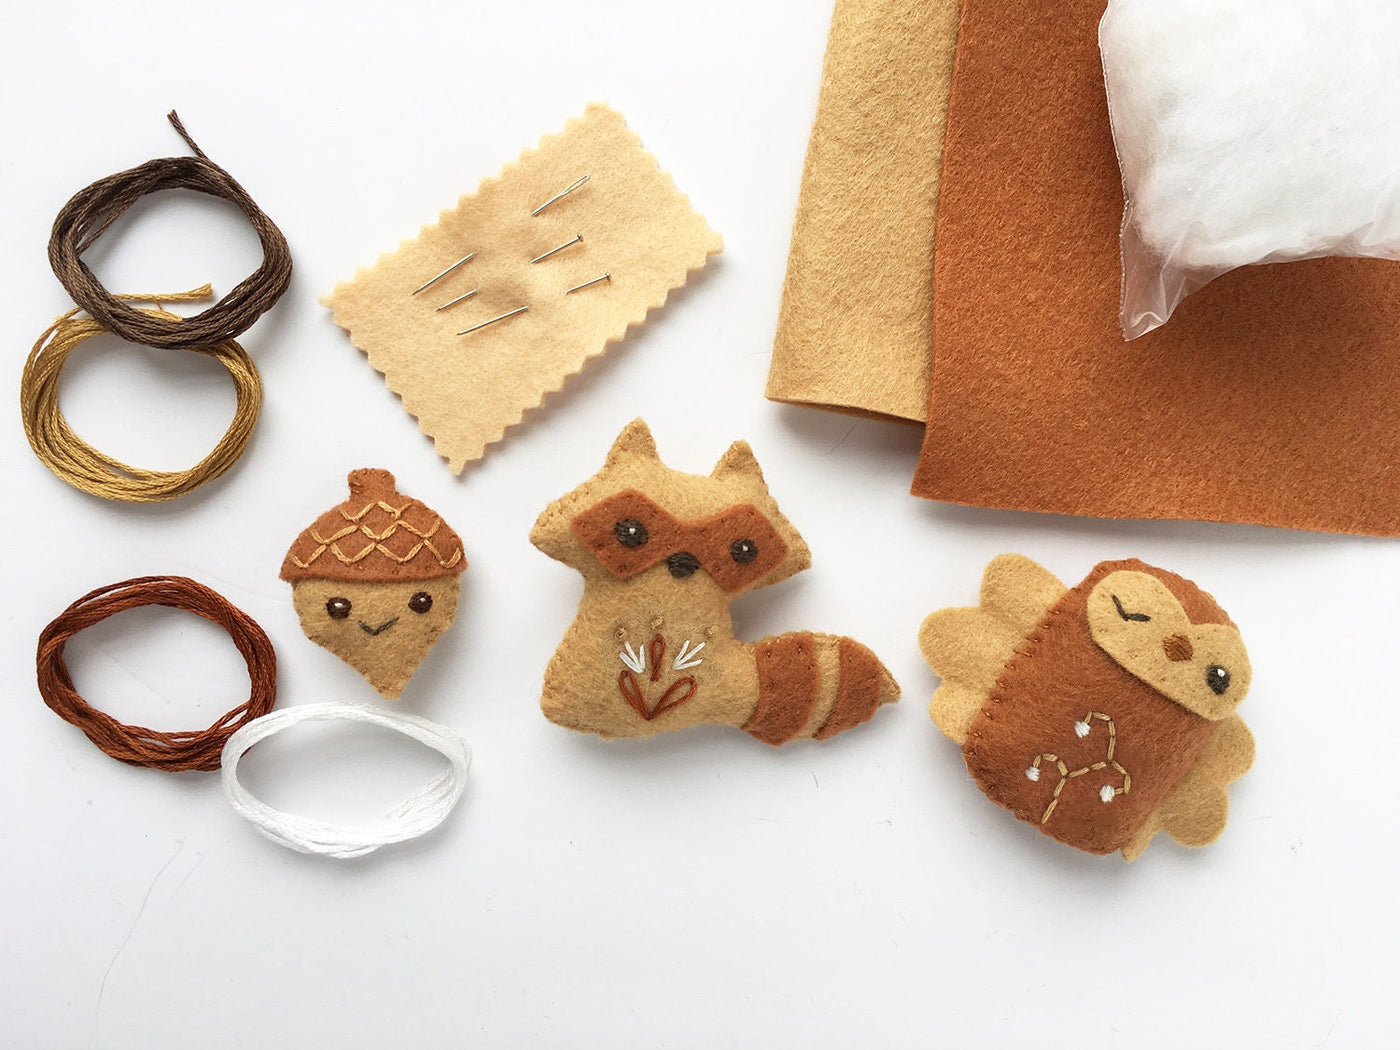 Sew Your Own Woodland Creatures with this Mini Felt Animals Sewing Kit